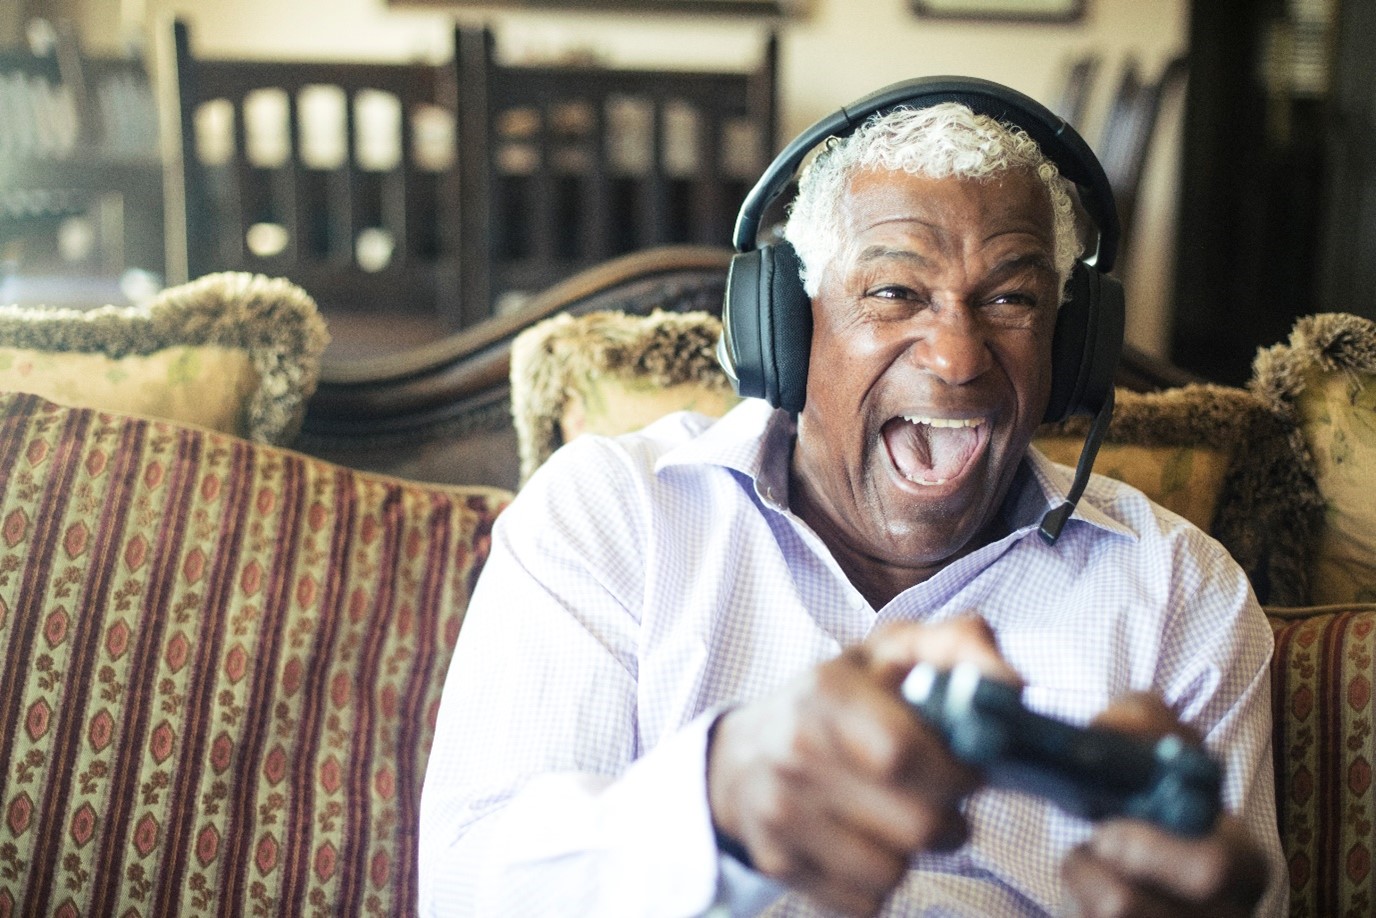 Man with headphones playing with controller